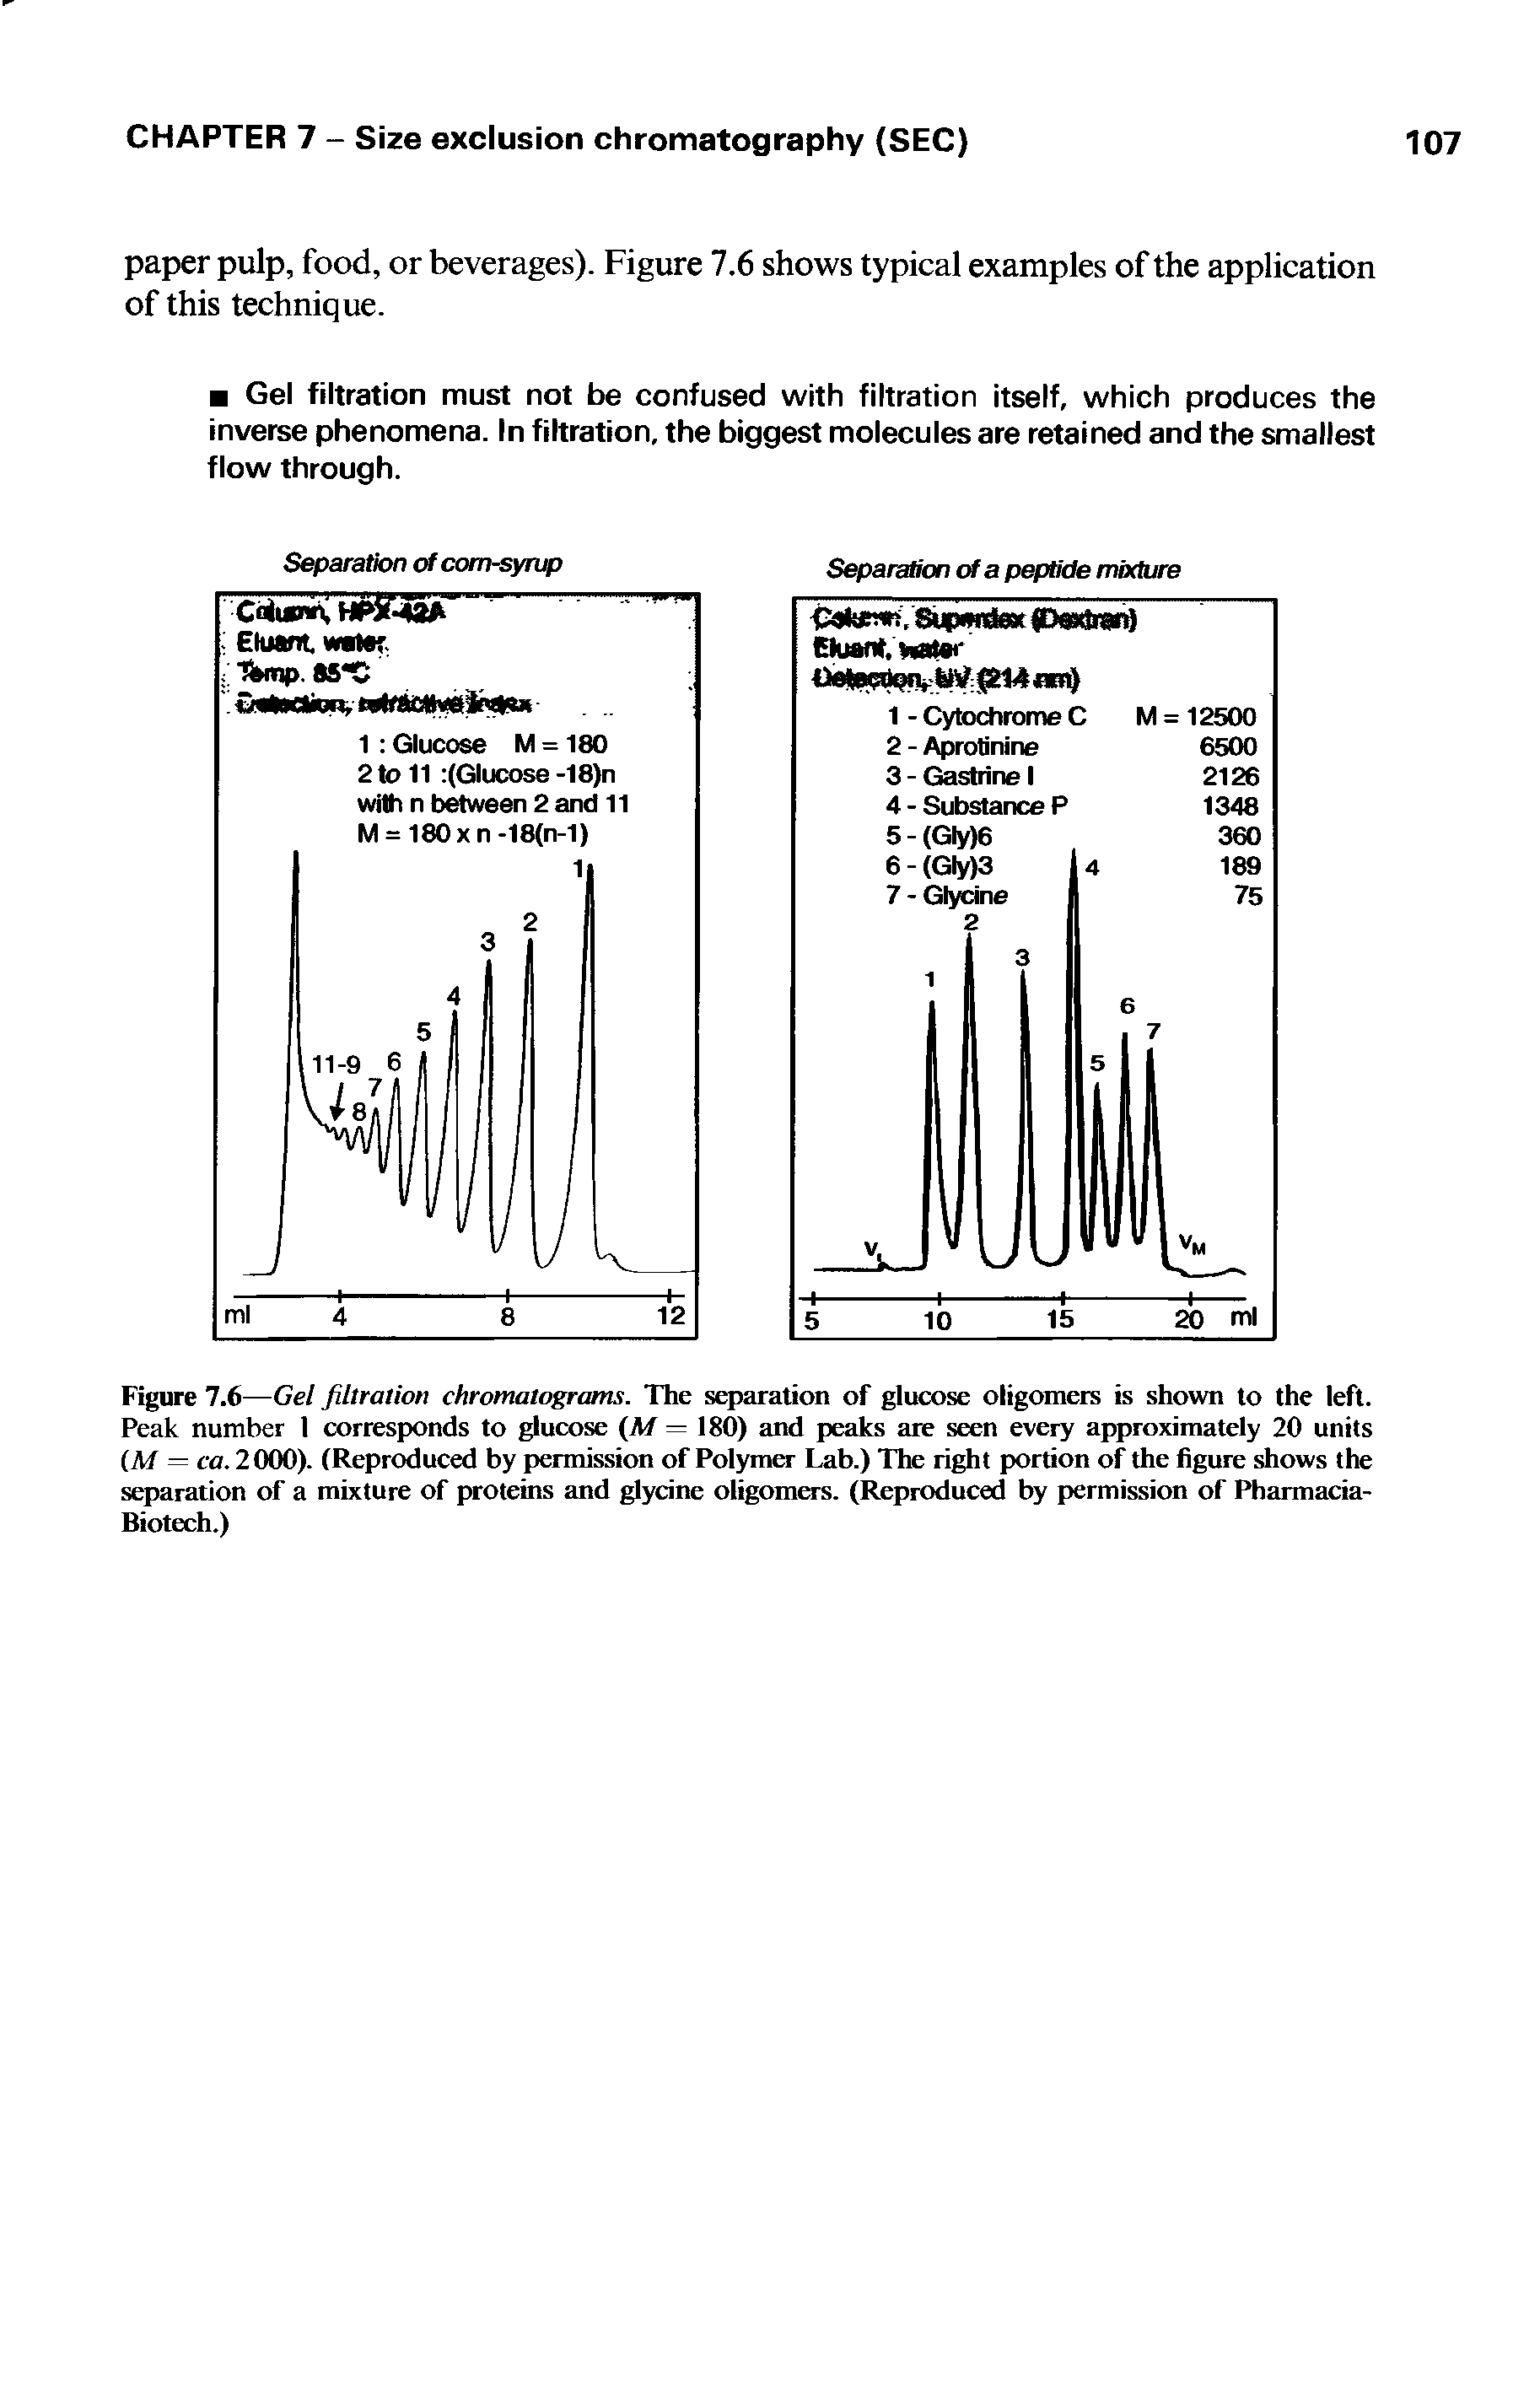 Figure 7.6—Gel filtration chromatograms. The separation of glucose oligomers is shown to the left. Peak number 1 corresponds to glucose (Af — 180) and peaks are seen every approximately 20 units (M = ca. 2 000). (Reproduced by permission of Polymer Lab.) The right portion of the figure shows the separation of a mixture of proteins and glycine oligomers. (Reproduced by permission of Pharmacia-Biotech.)...